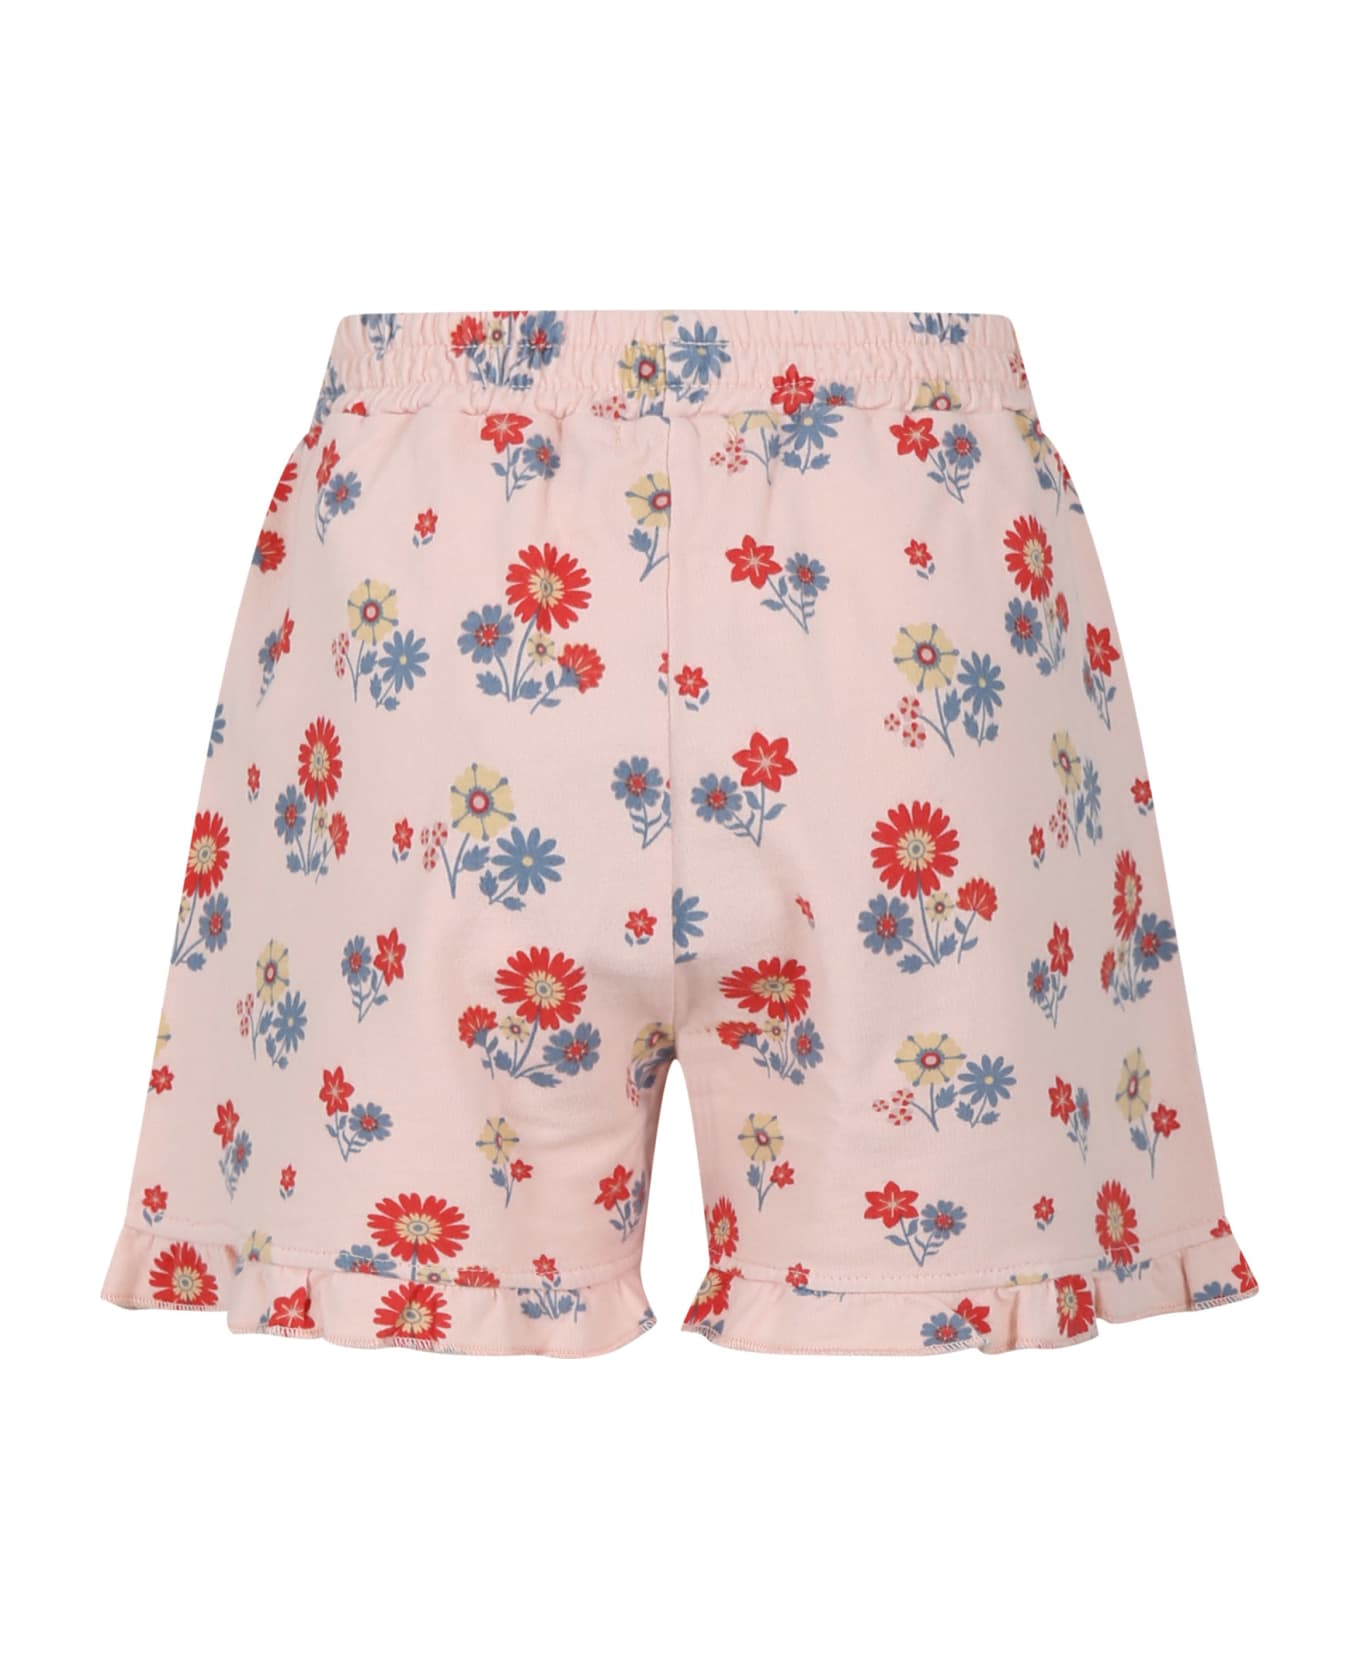 Coco Au Lait Pink Shorts For Girl With Flowers Print - Pink